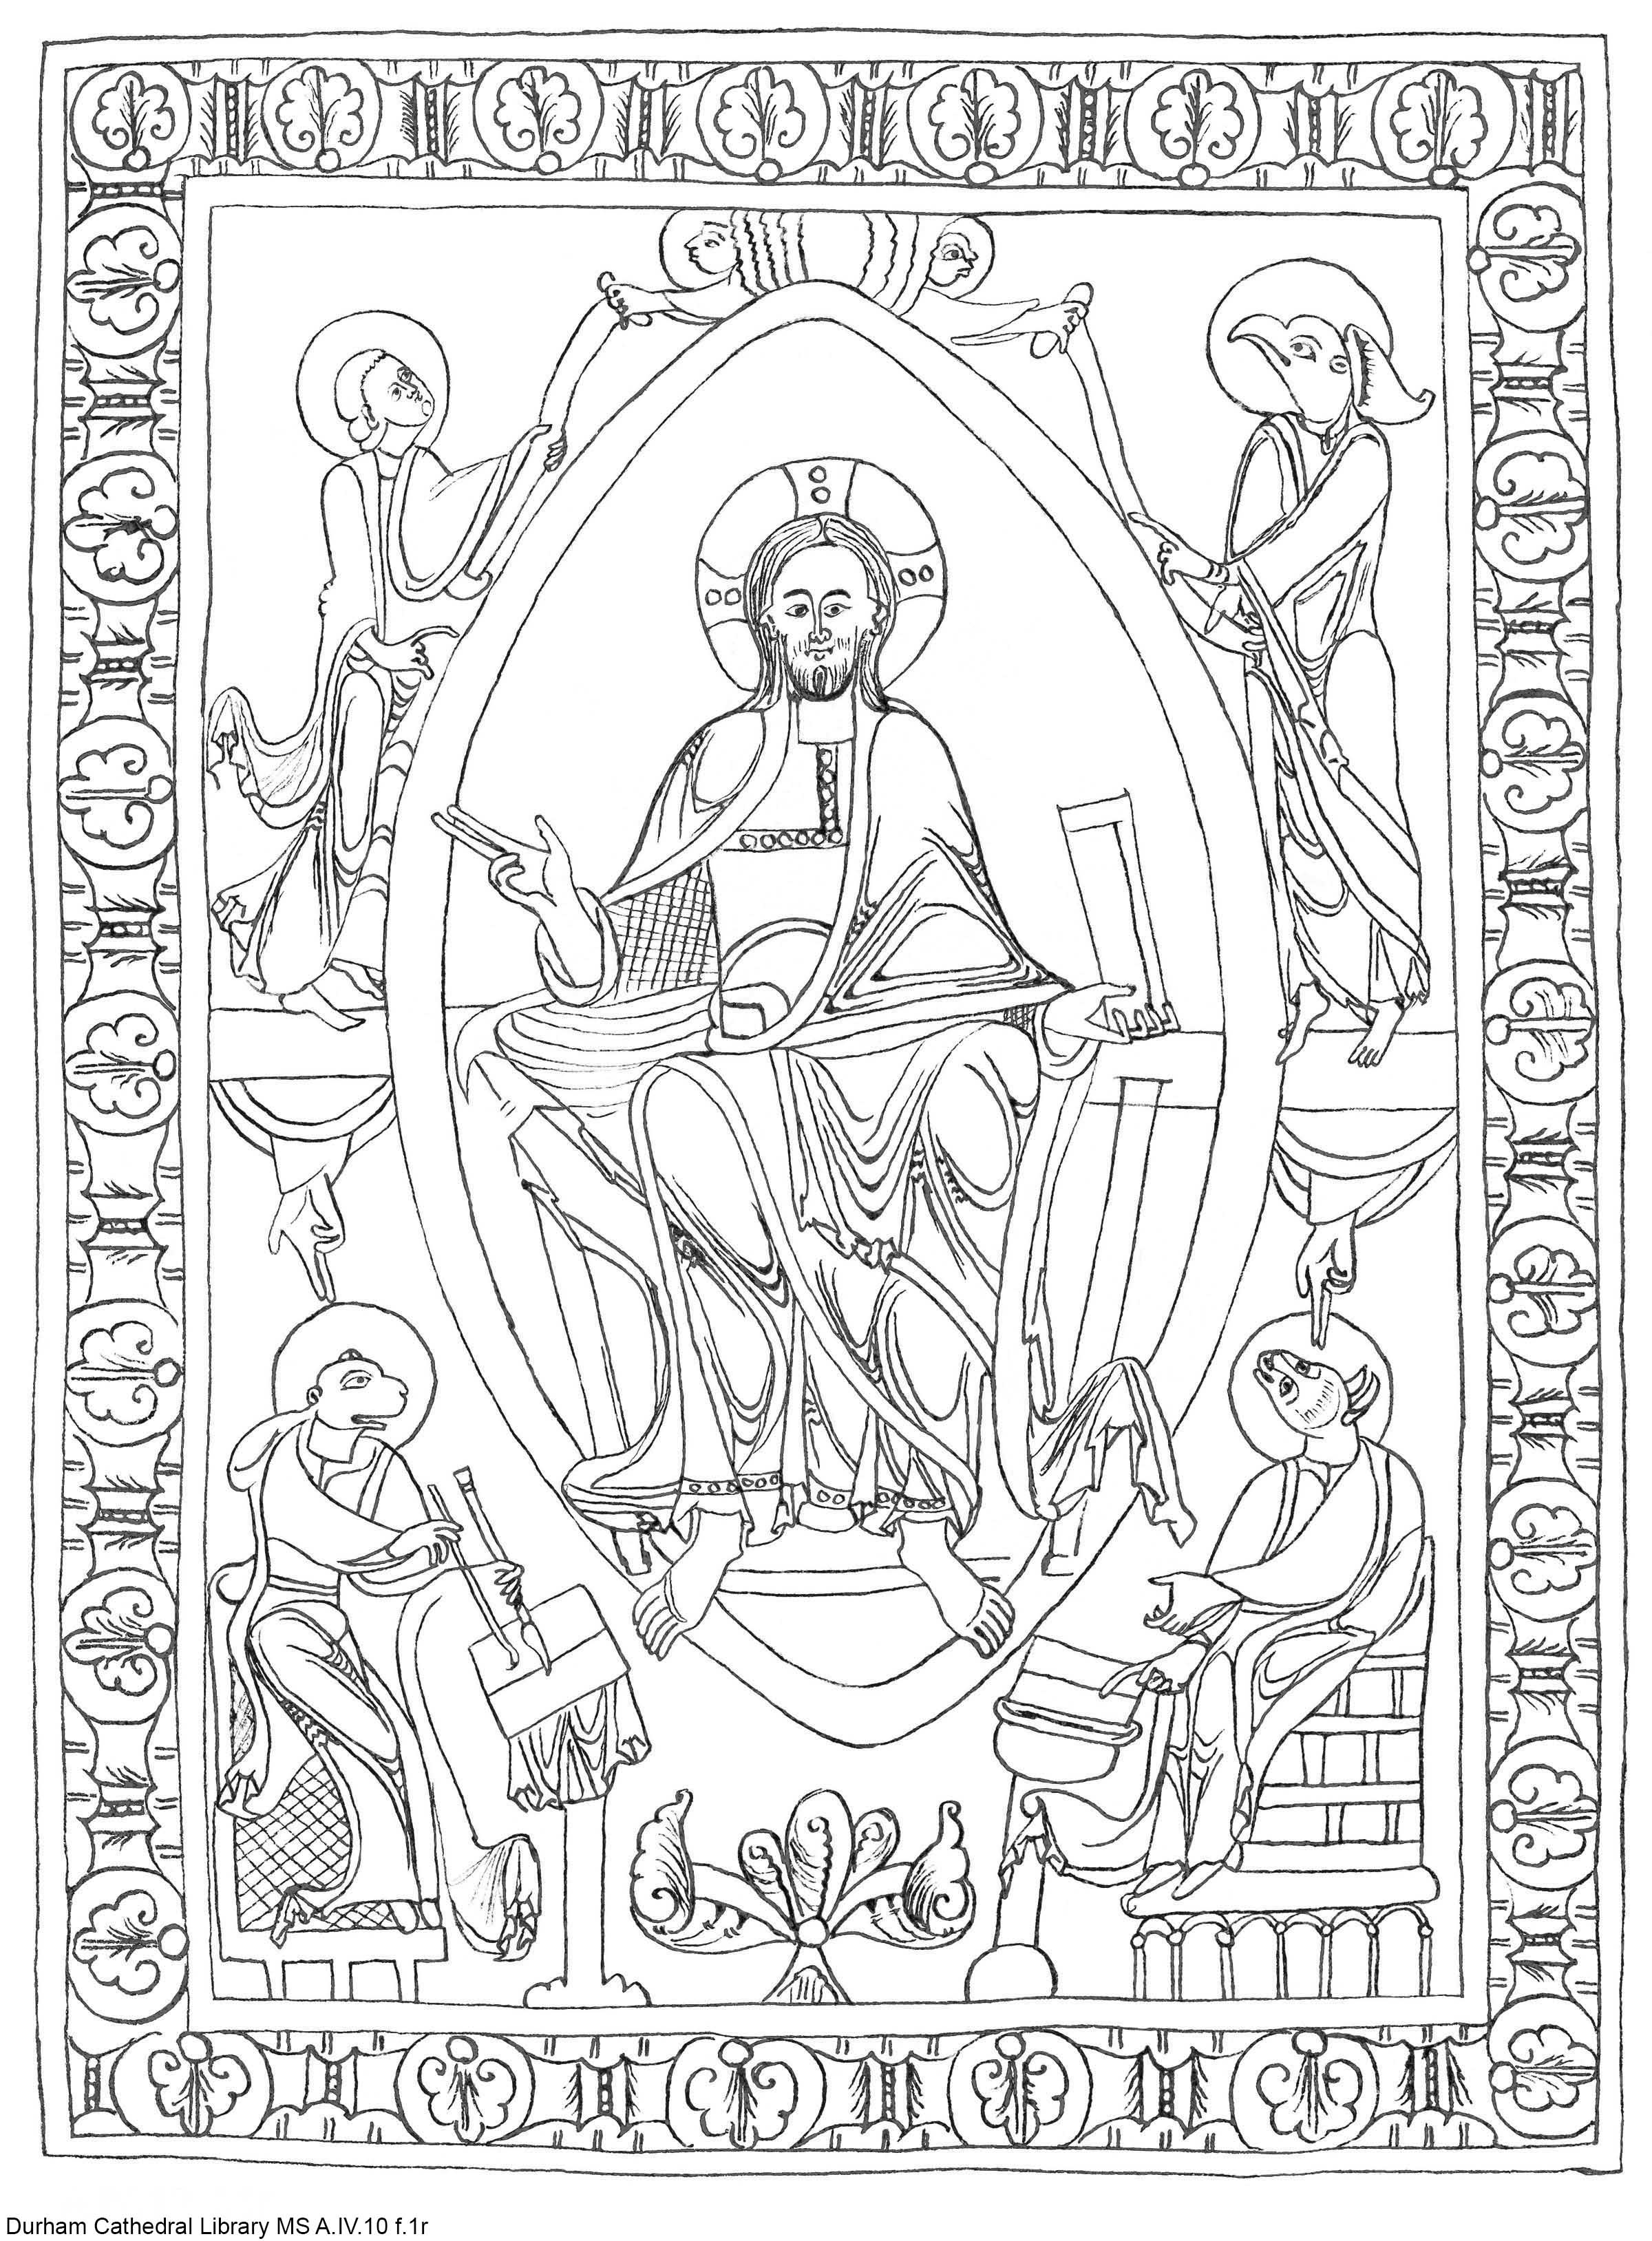 A.IV.10 f.1r colouring book style, A4 size